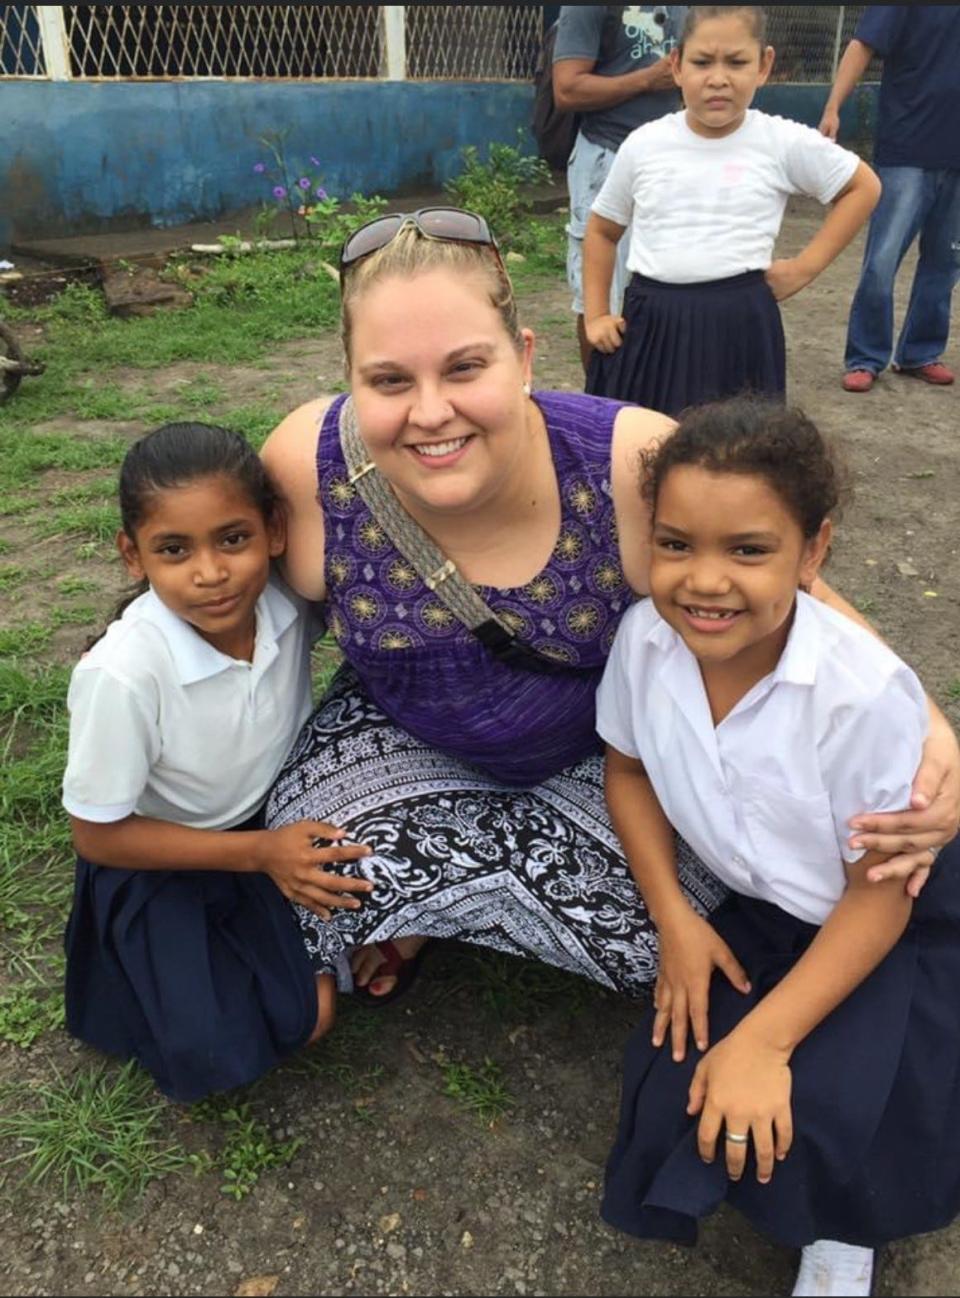 Jaime Kelley, an elementary school teacher, spent time recently on a mission trip to Nicaragua.